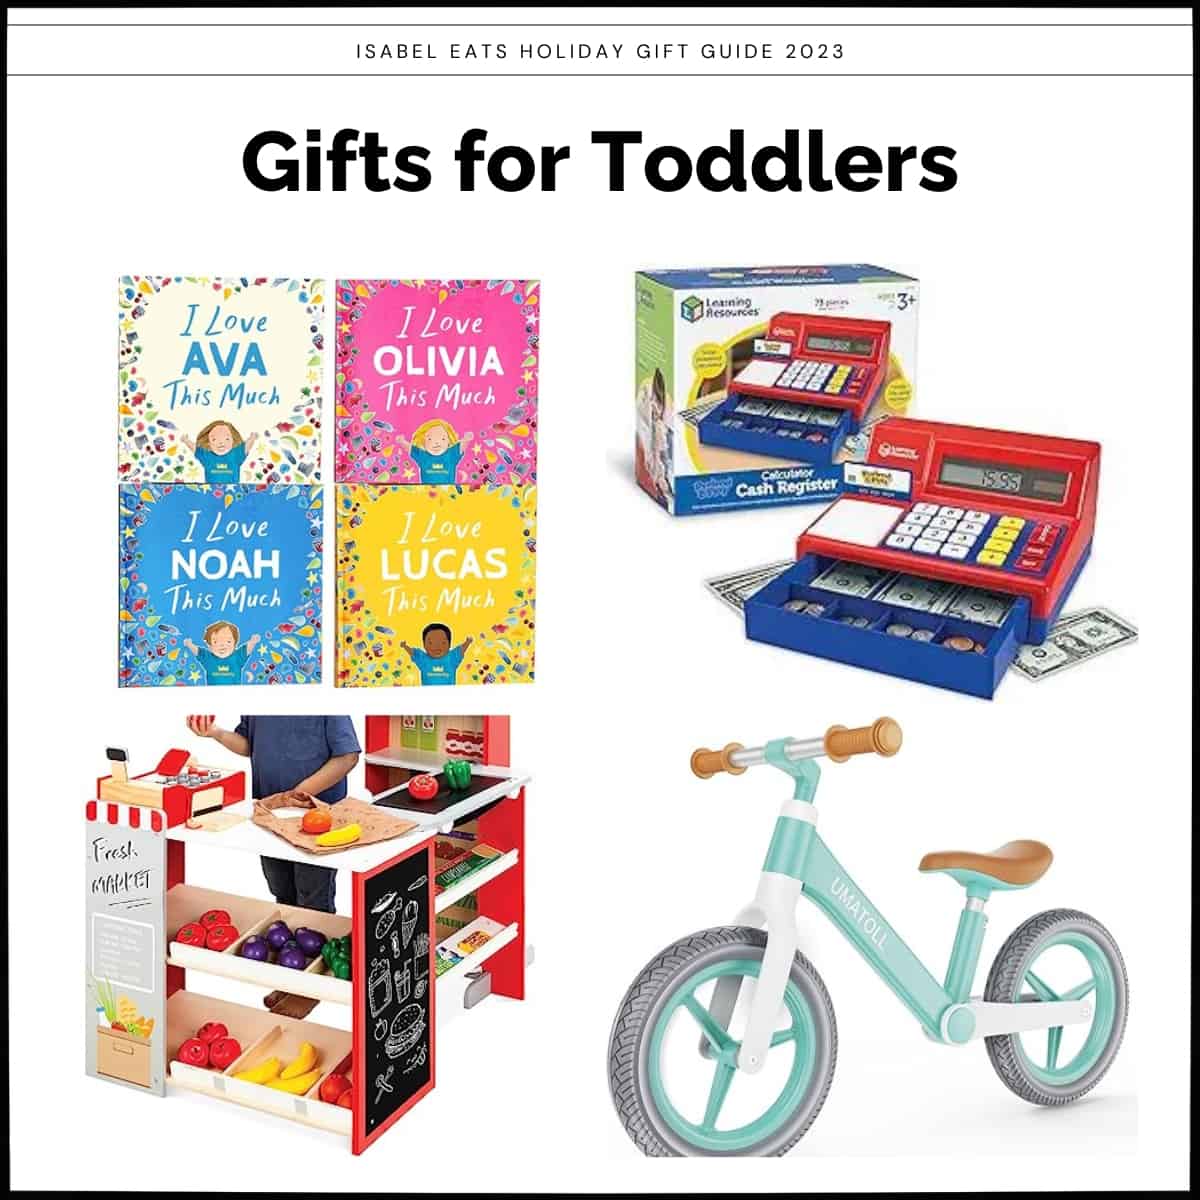 Gifts for Toddlers collage